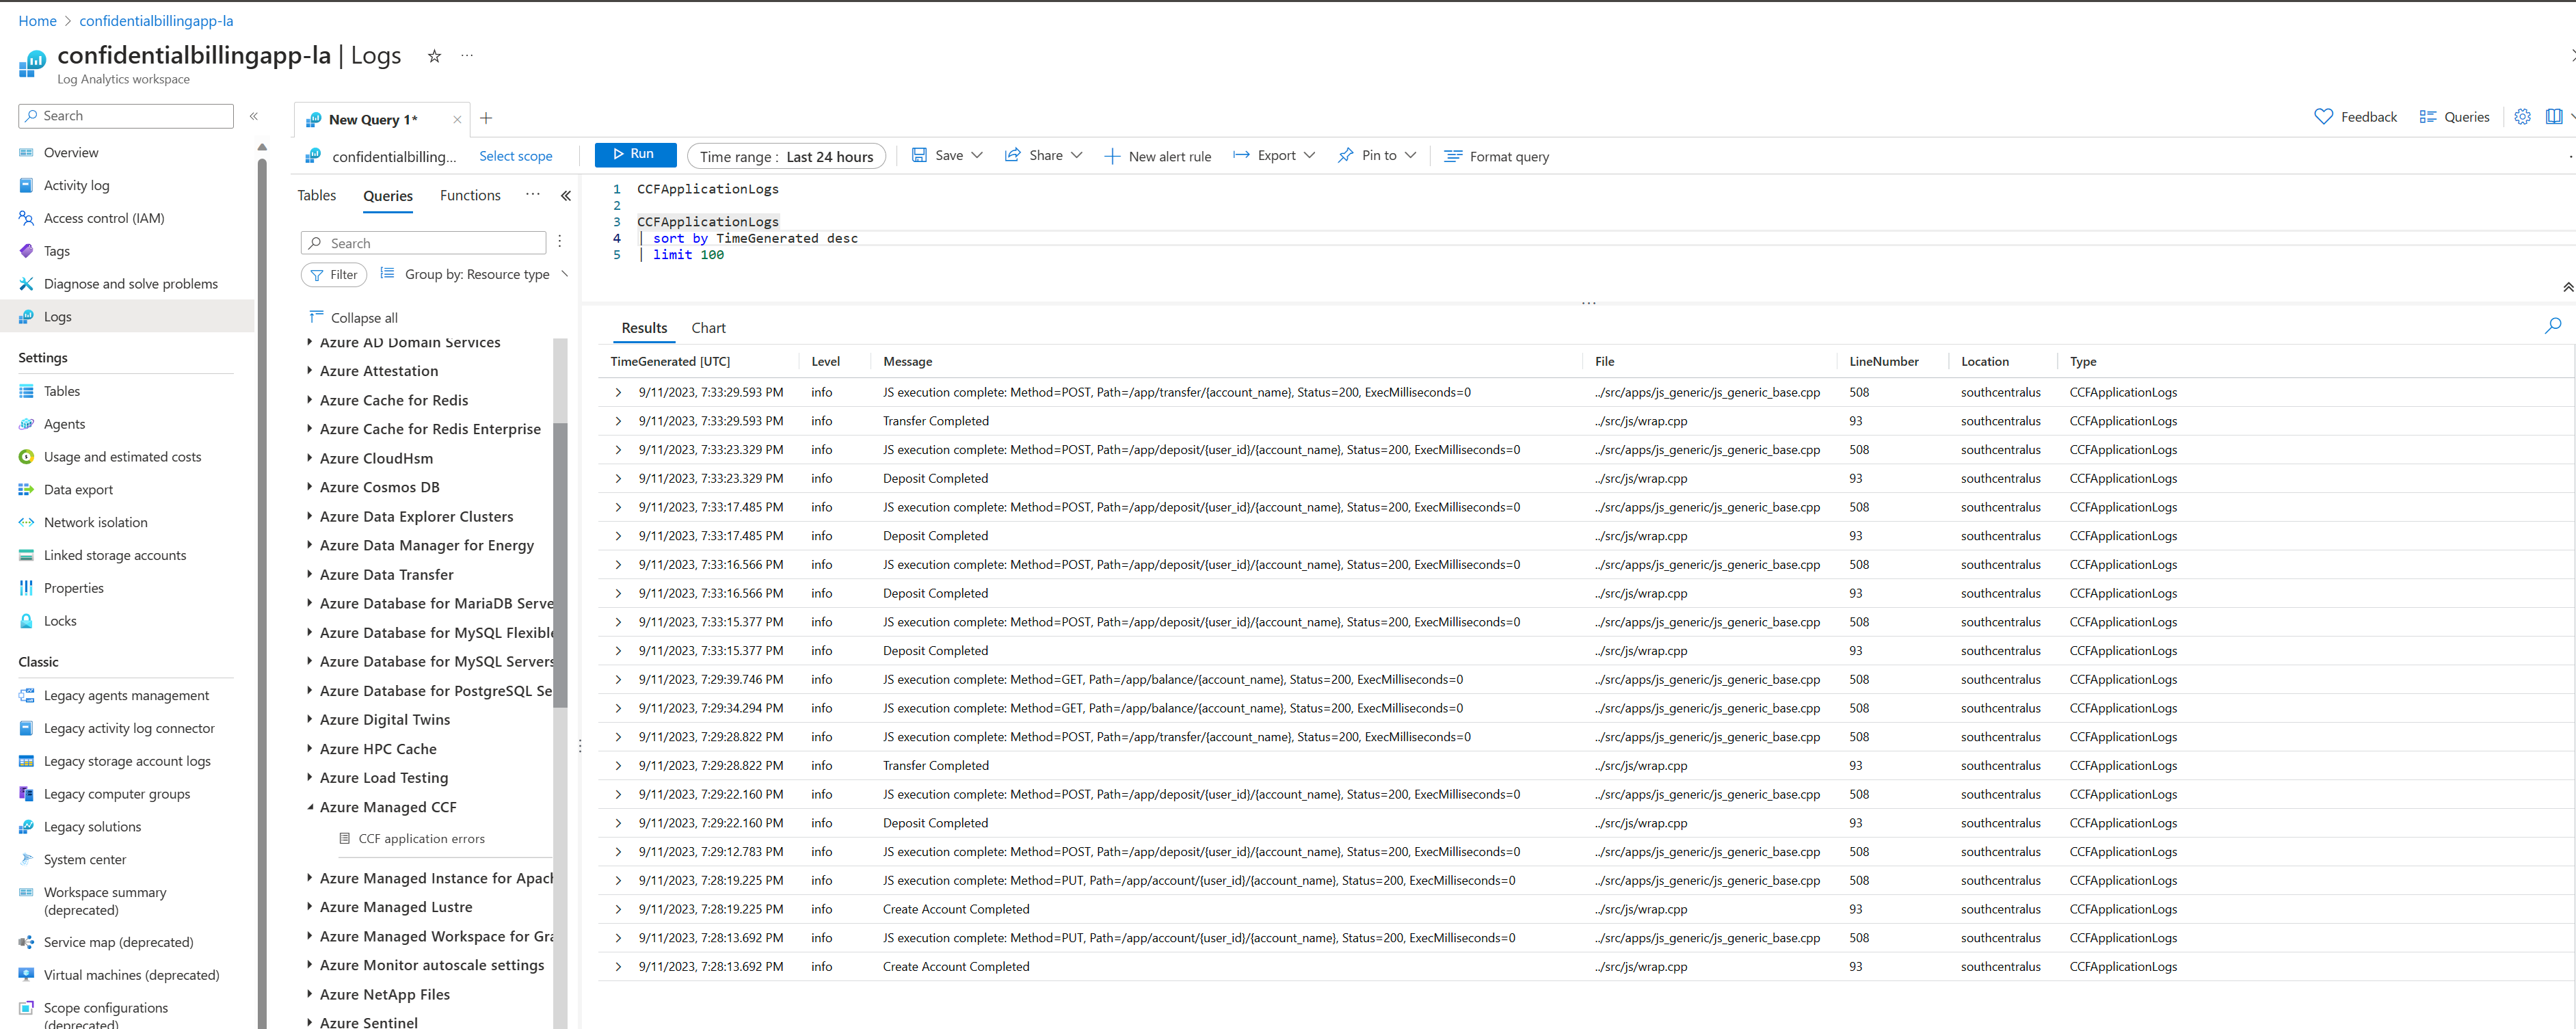 Screenshot that shows the Managed CCF resource query in the Log Analytics screen.